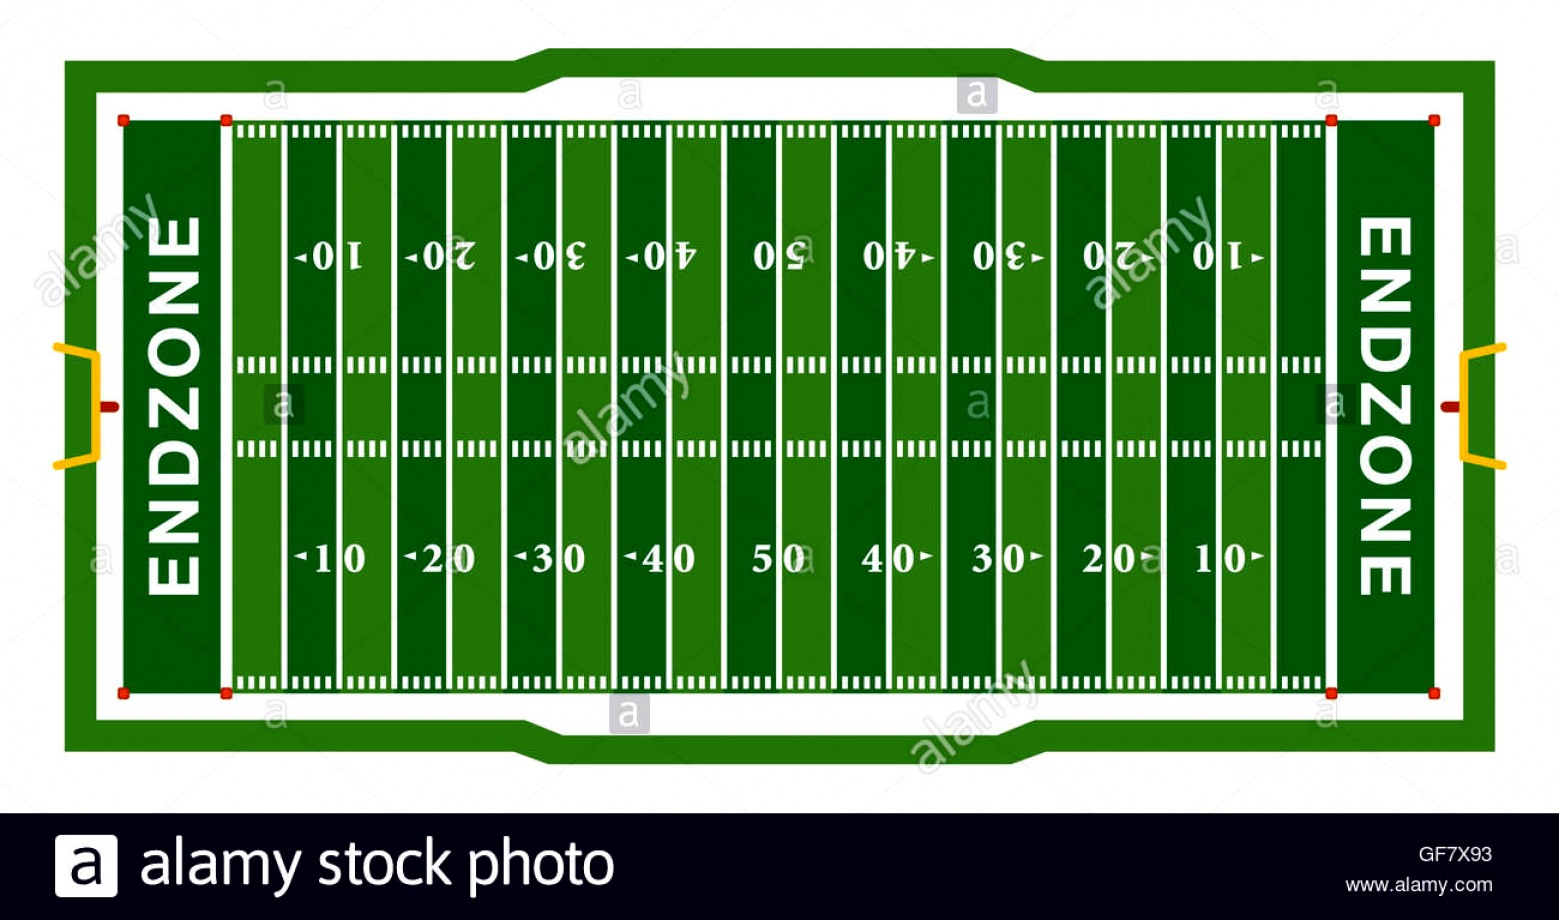 Football Field Diagram Football Field Diagram A Realistic Aerial View Of An Official